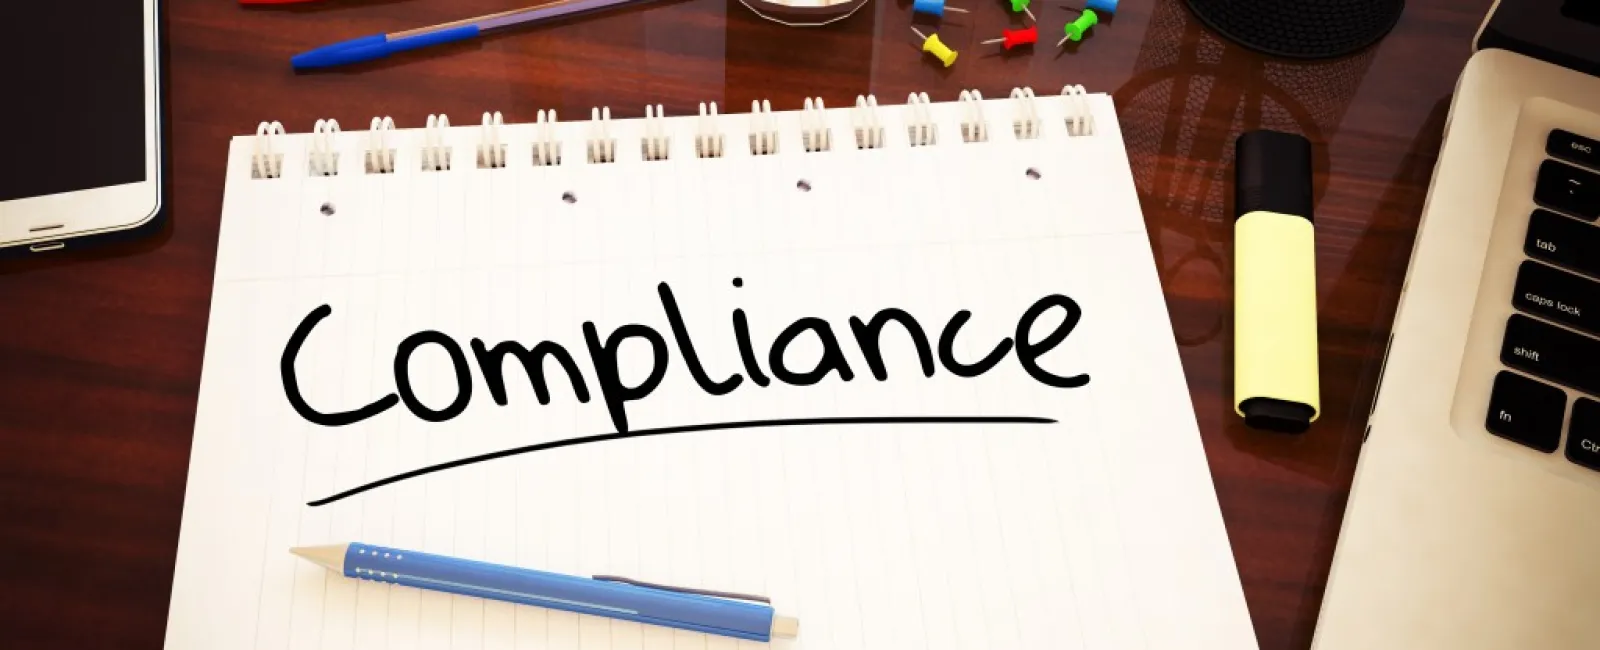 New 2016 Corporate Compliance and FWA Training Requirements